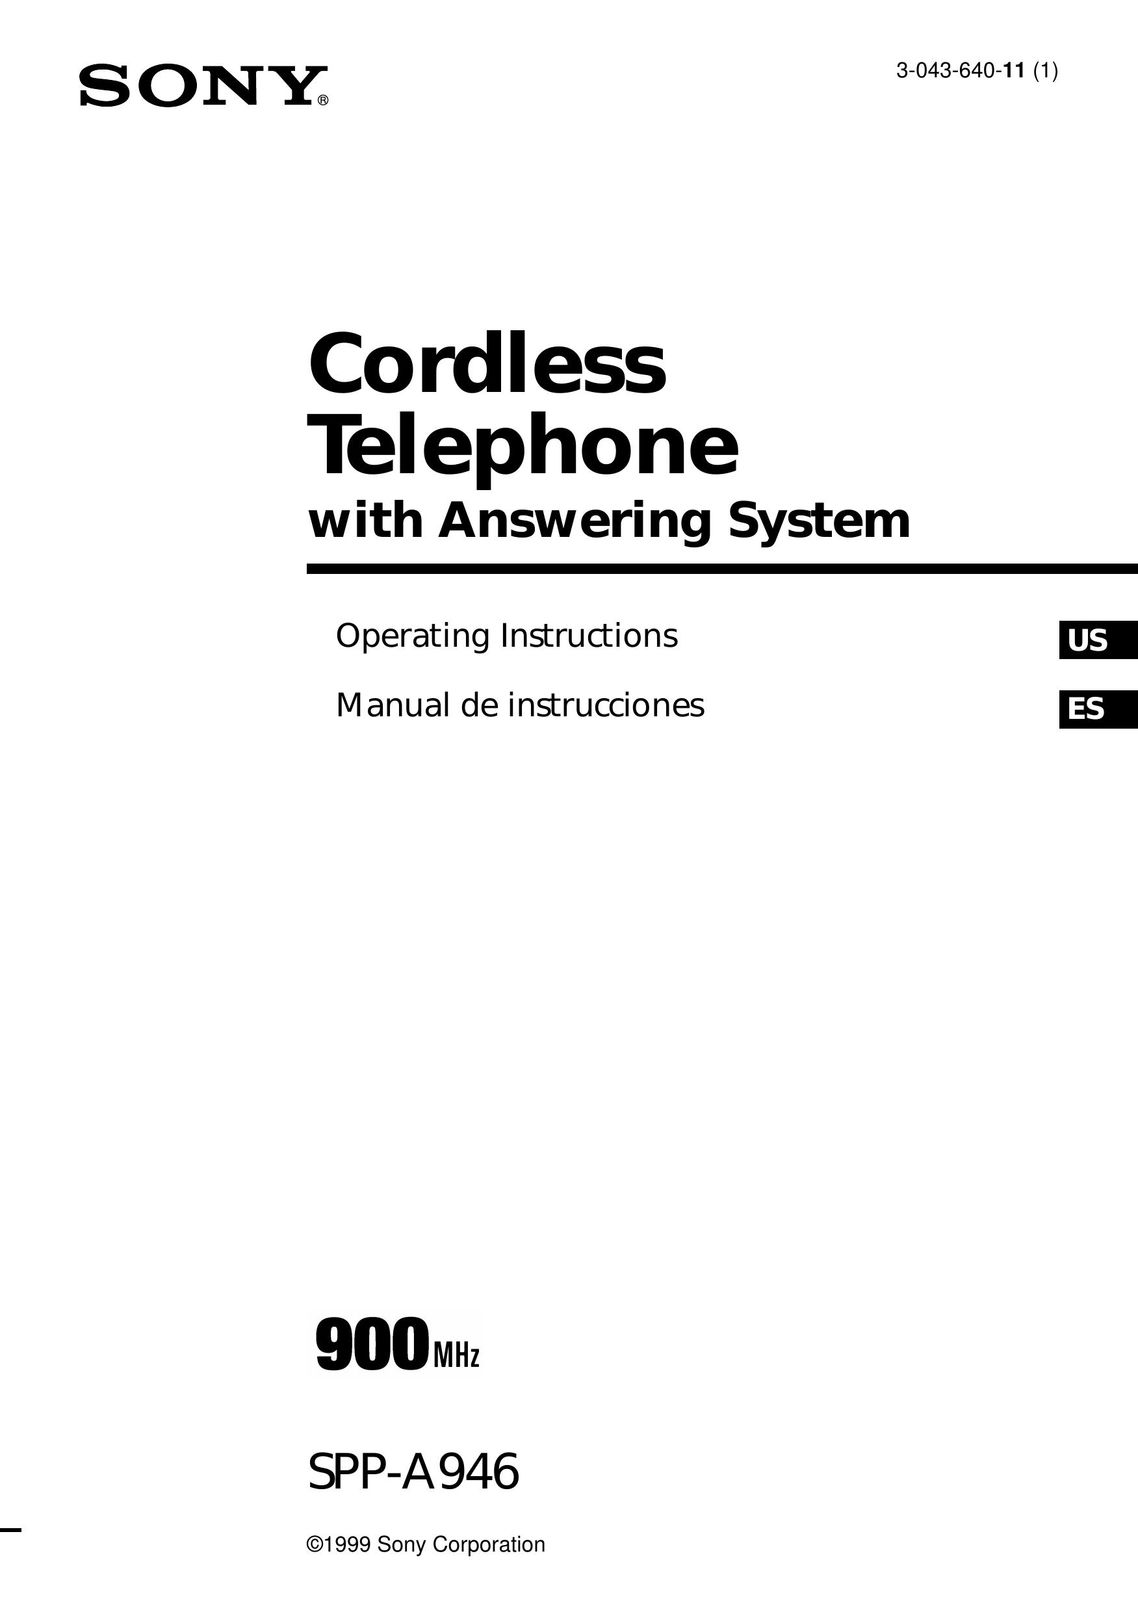 Sony SPP-A946 Cordless Telephone User Manual